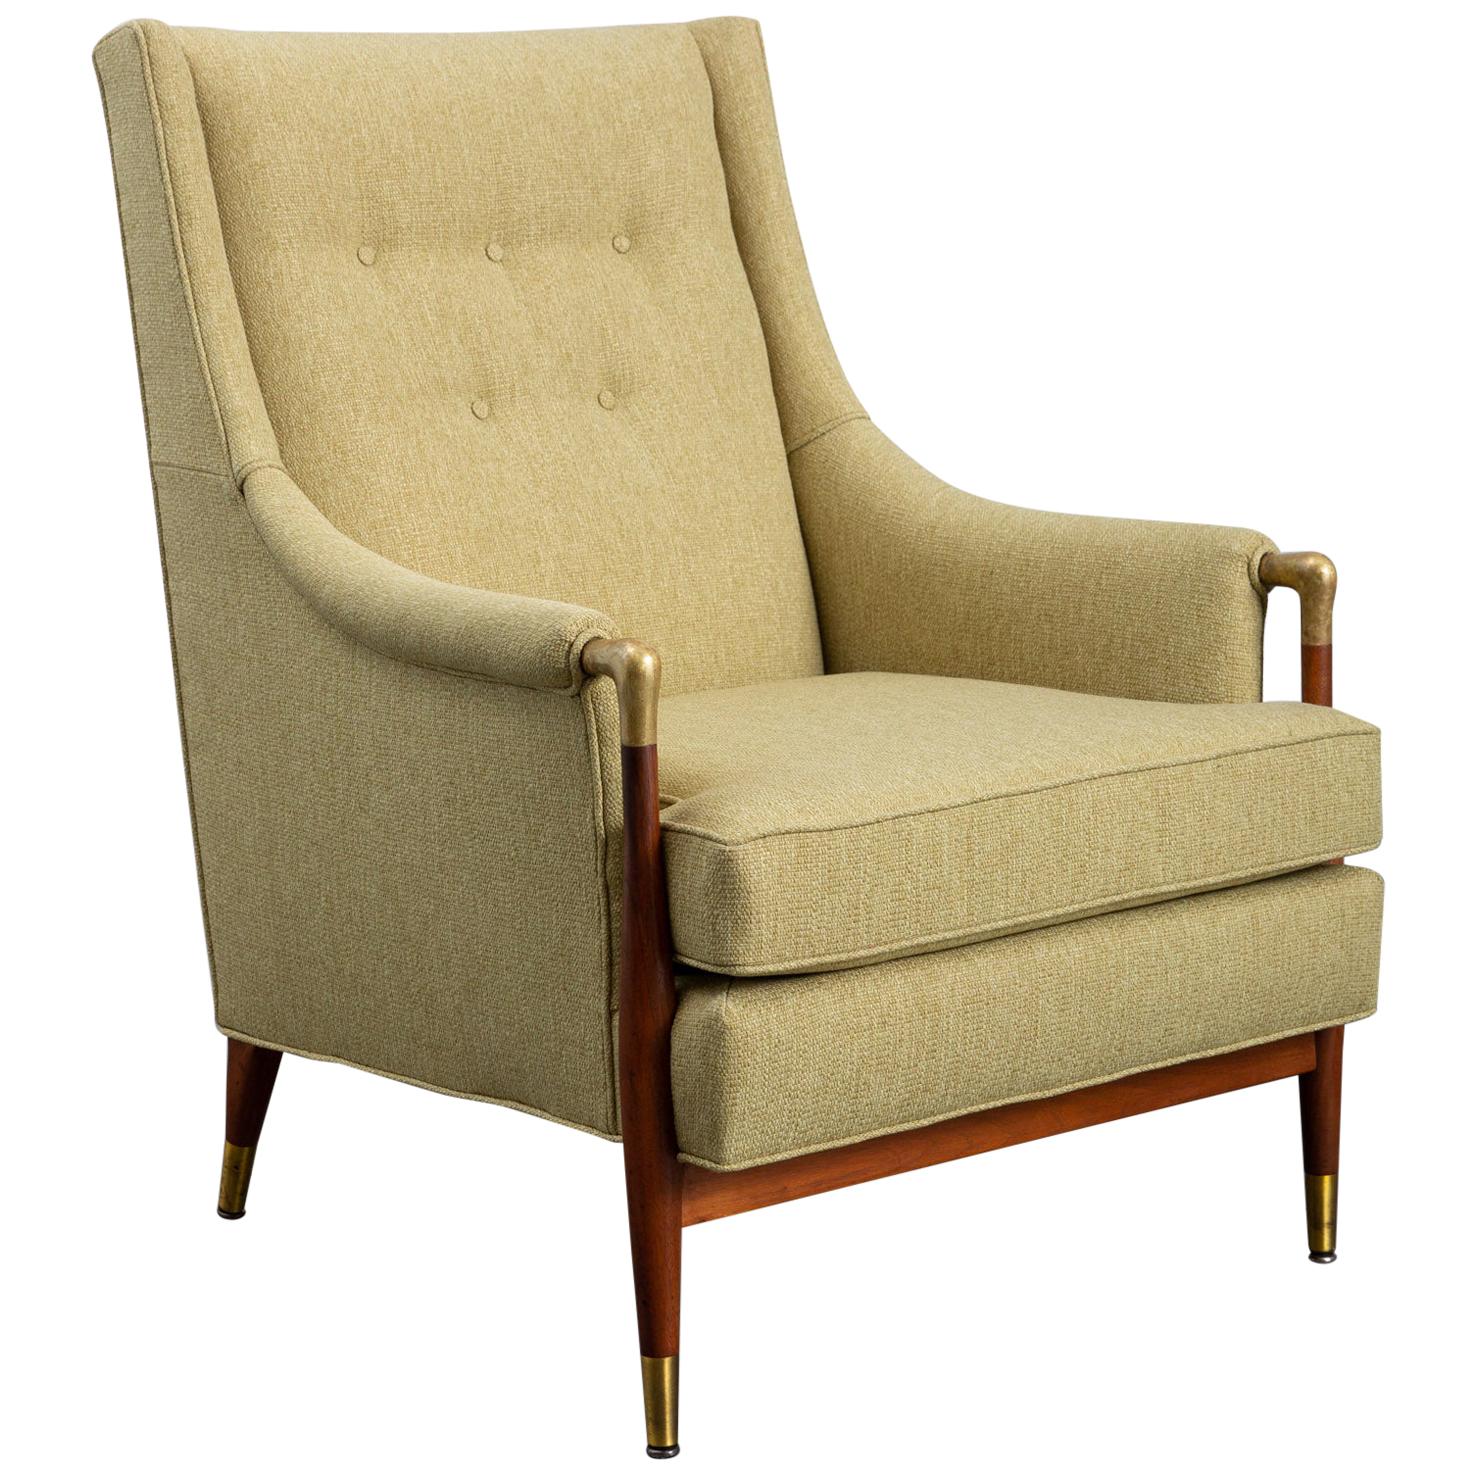 Newly Upholstered Mid-Century Modern Armchair with Brass Details